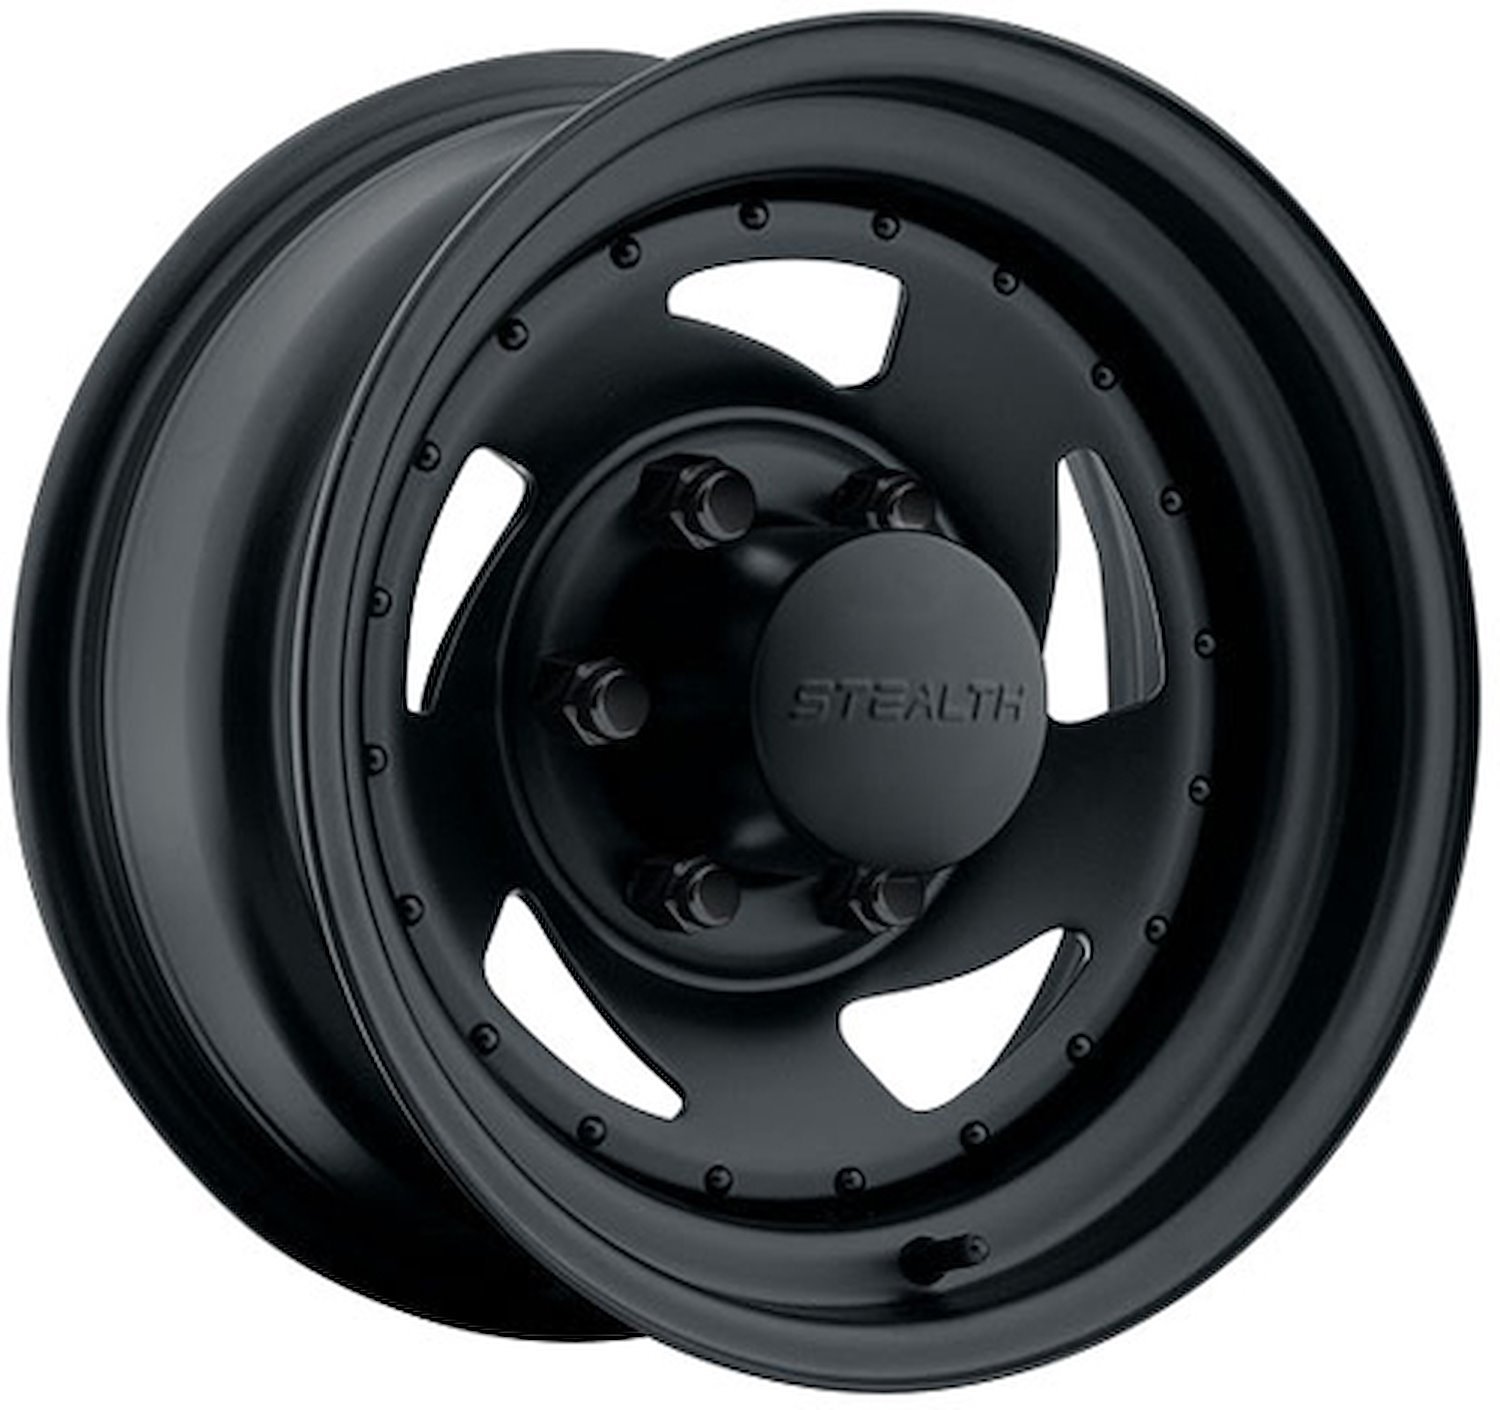 STEALTH BLACK BLADE 15 x 7 5 x 55 Bolt Circle 375 Back Spacing 6 offset 428 Center Bore 1600 lbs Load Rating